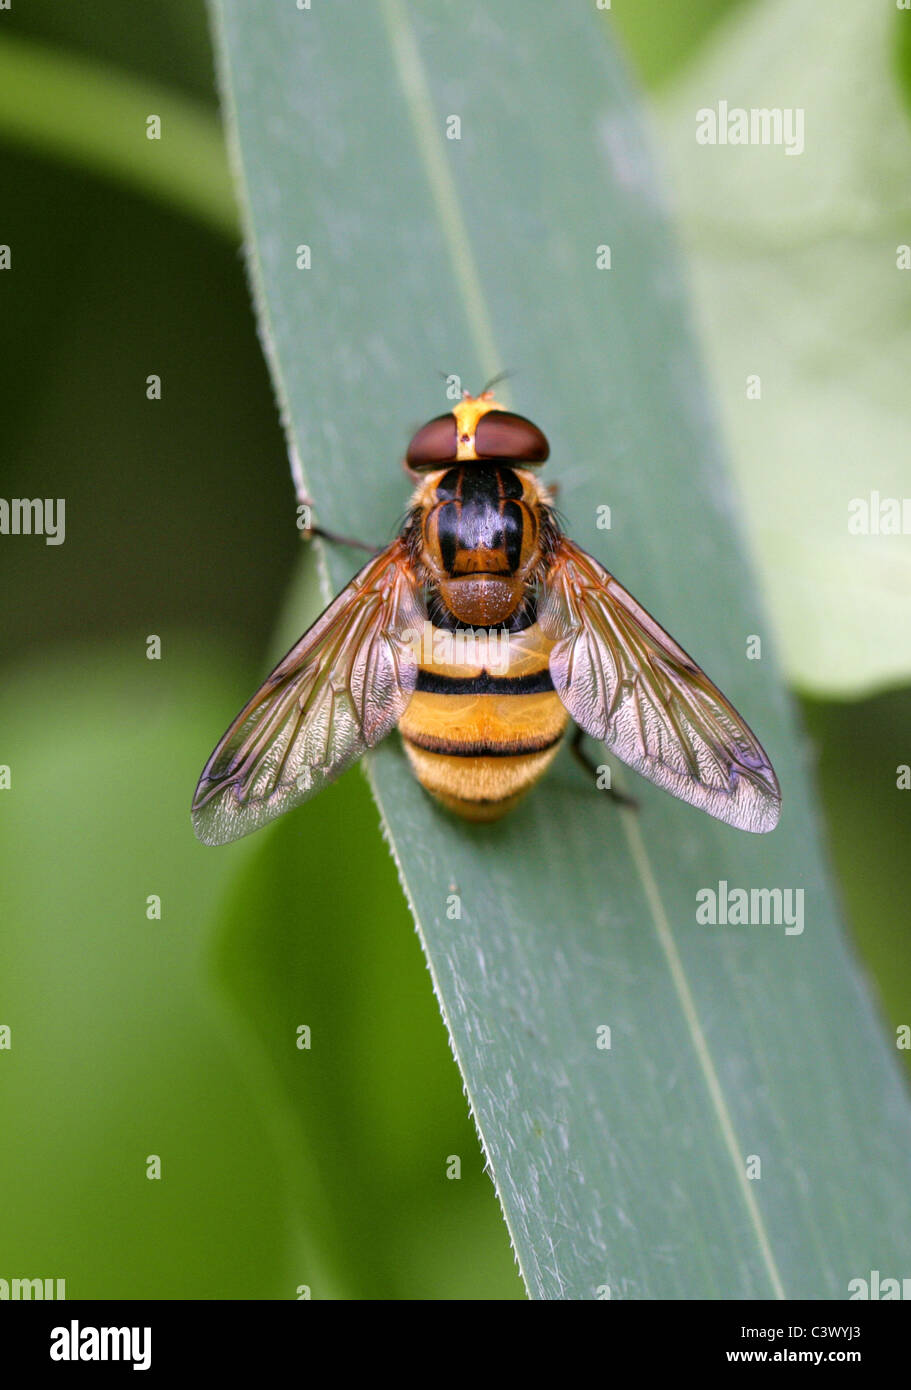 Grande giallo Hoverfly, Volucella inanis, Syrphidae, Diptera. Syn. Musca inanis, Musca annulata, Volucella annulata. Hornet Mimic Foto Stock